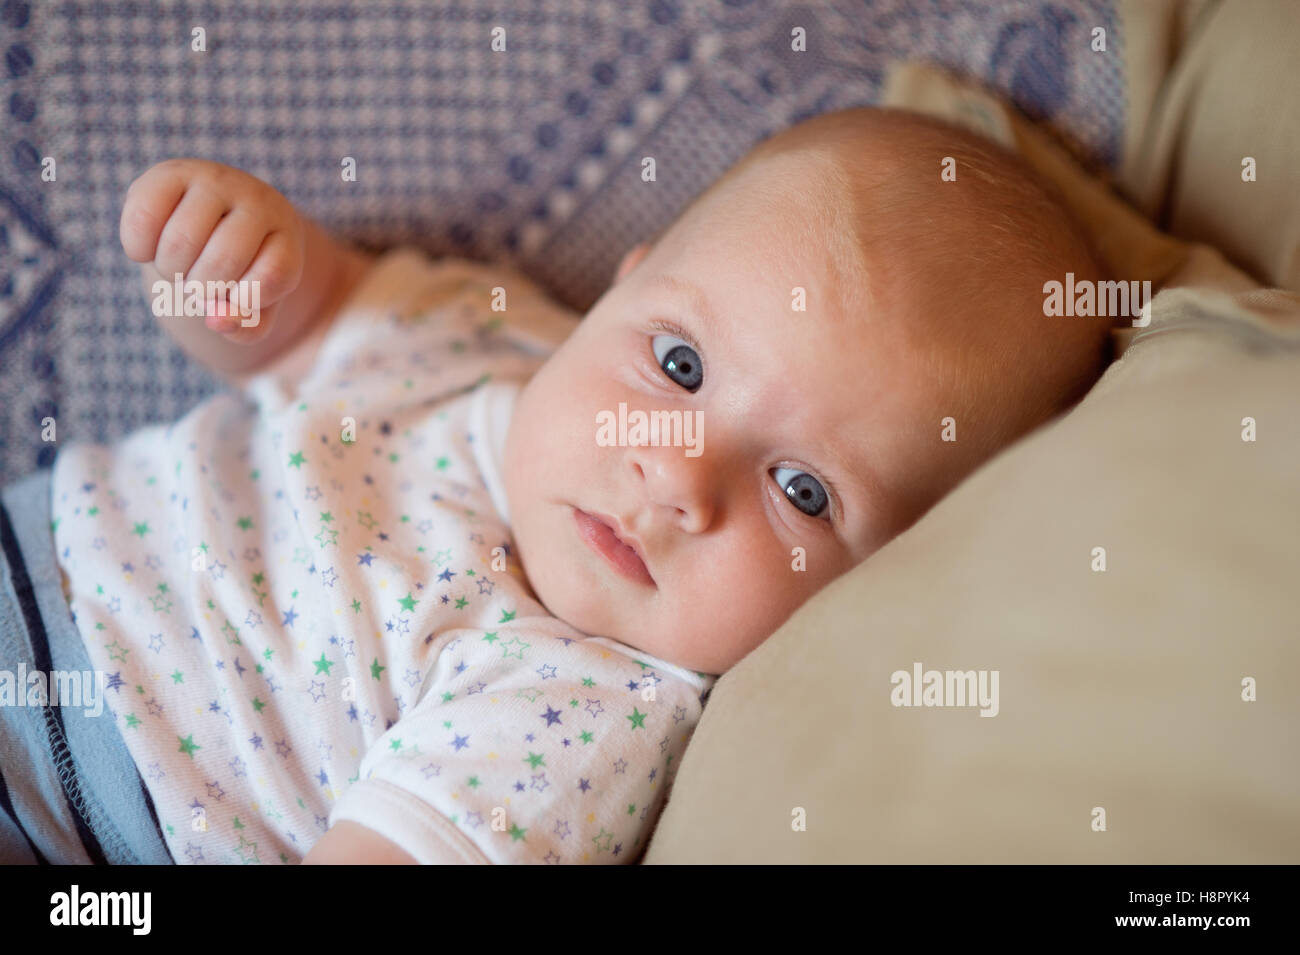 Little baby boy with big blue eyes lying on couch. Stock Photo